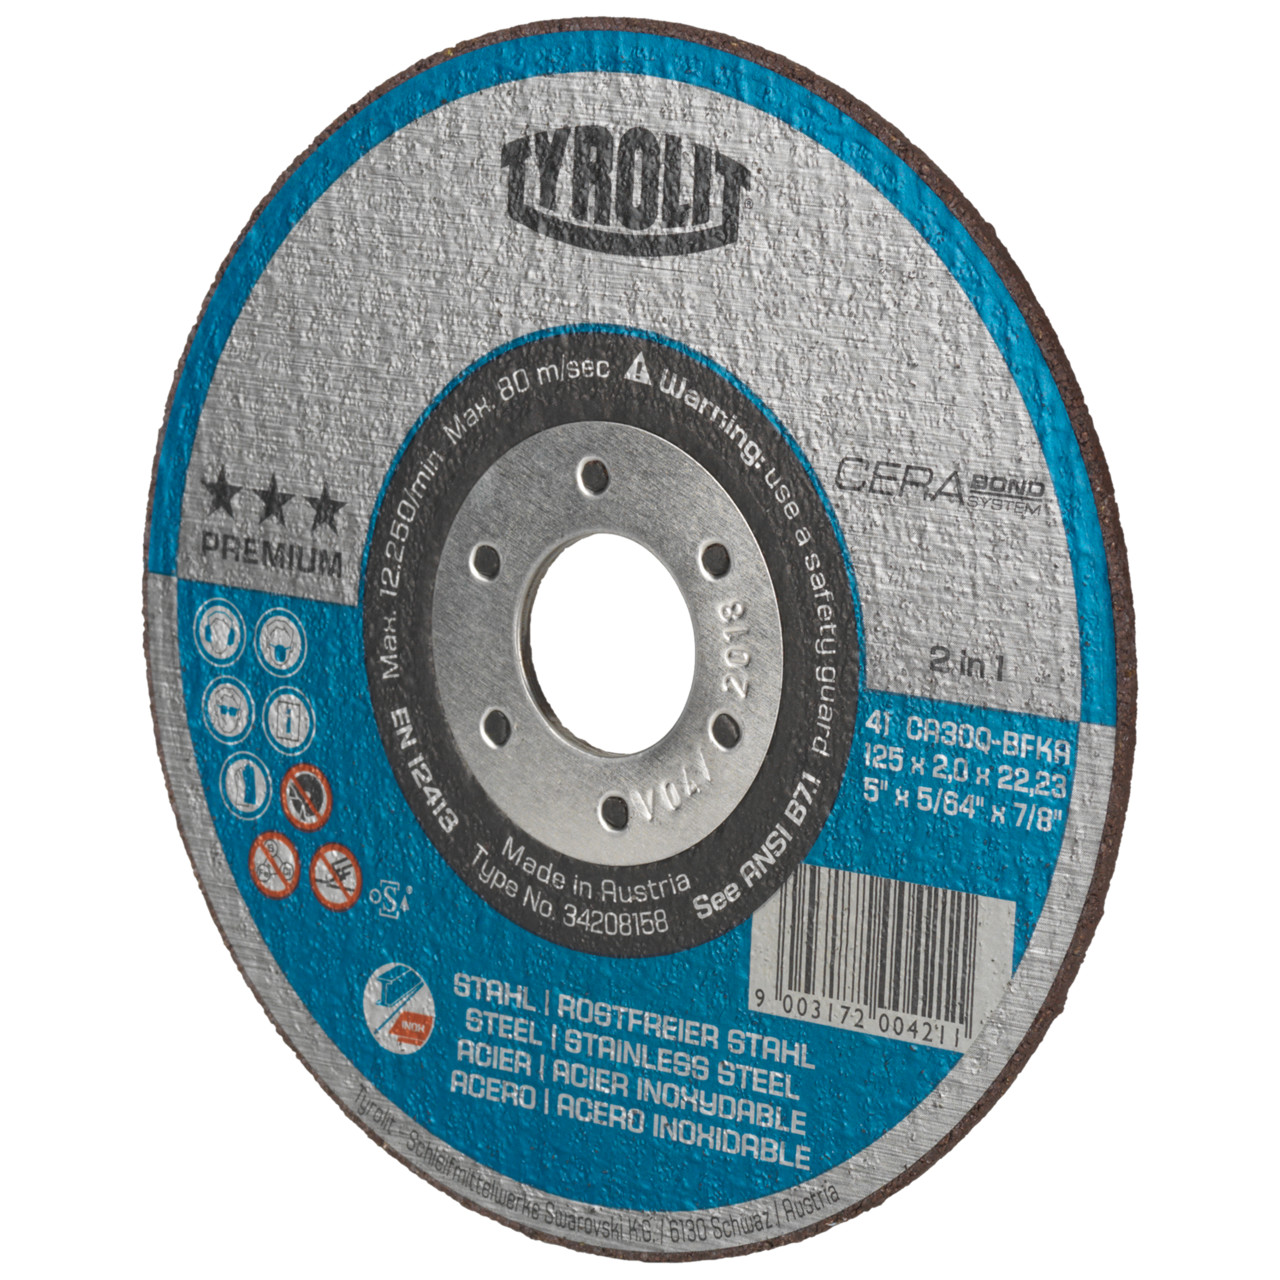 TYROLIT CERABOND cut-off wheel DxDxH 125x1.6x22.23 2in1 for steel and stainless steel, shape: 41 - straight version, Art. 34256266